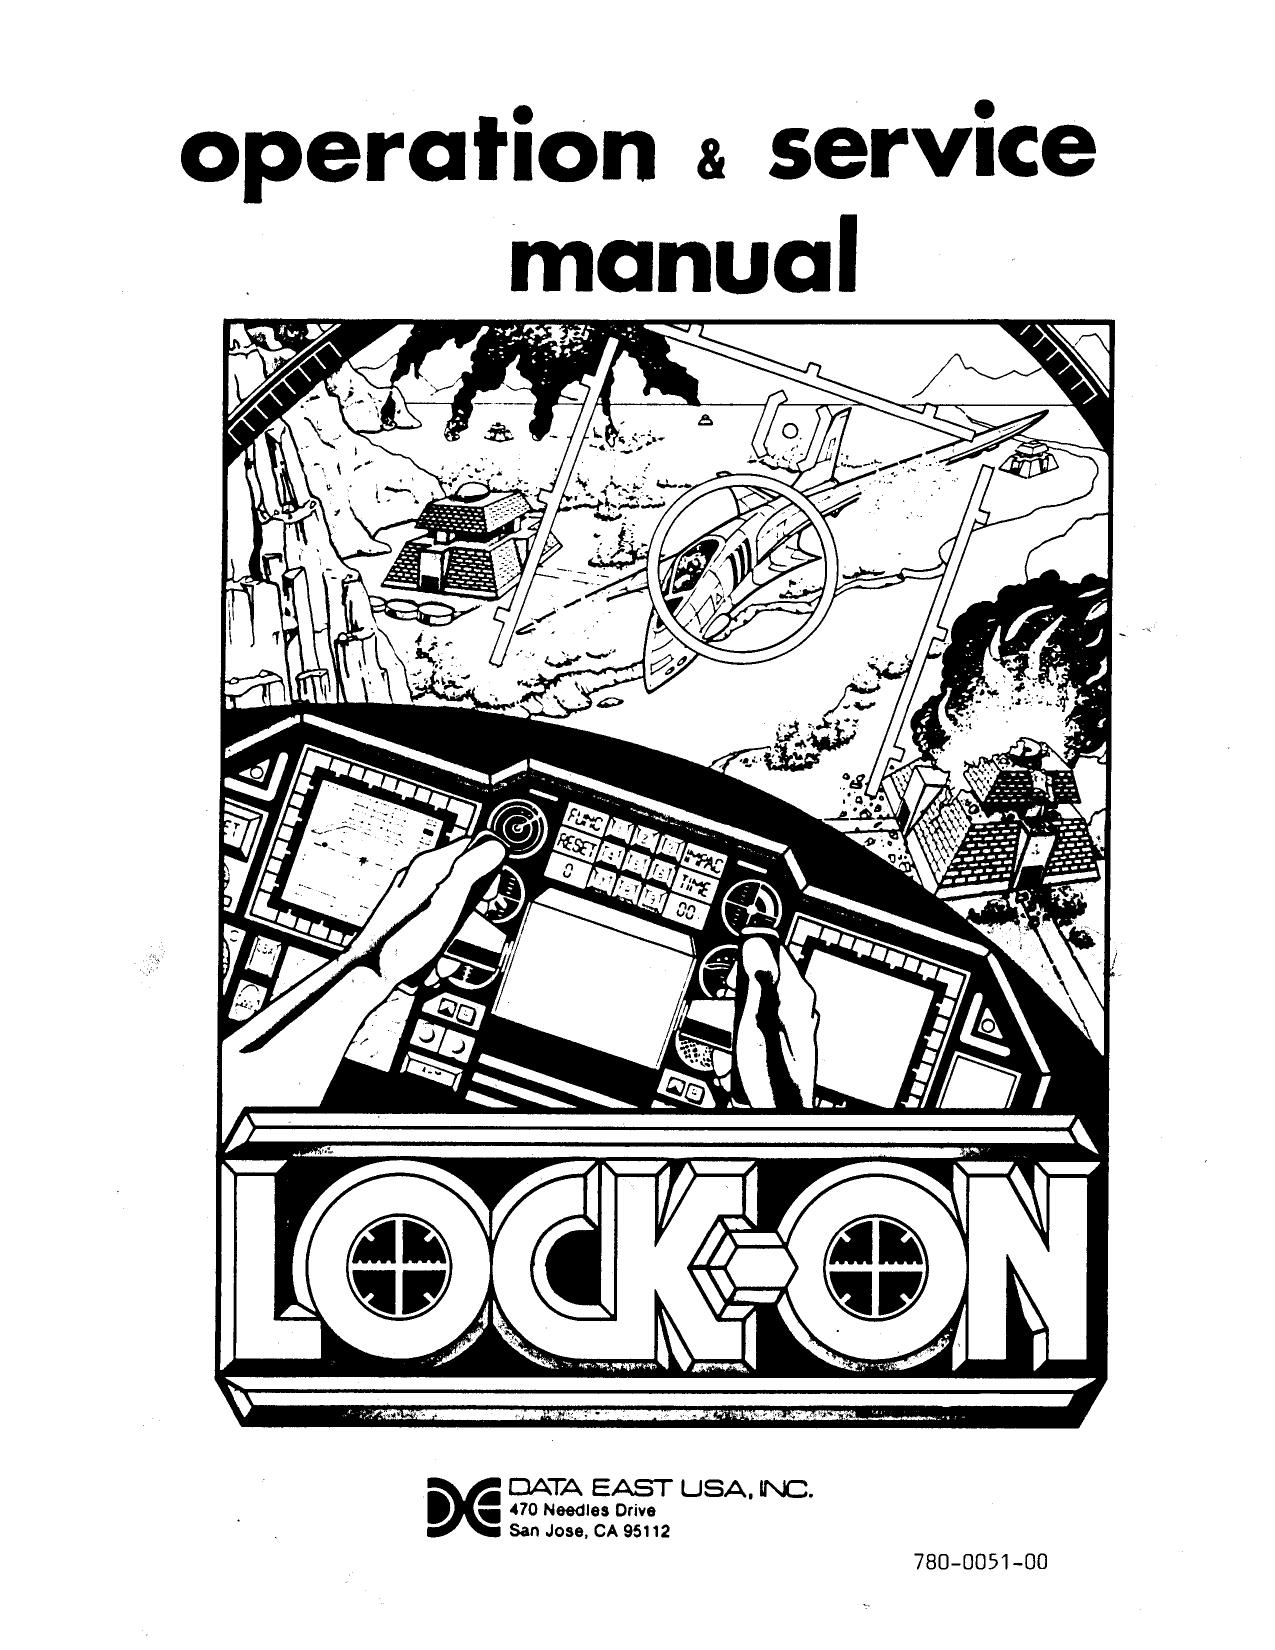 Moon Cresta Operating Instructions and Service Manual (420-0518)